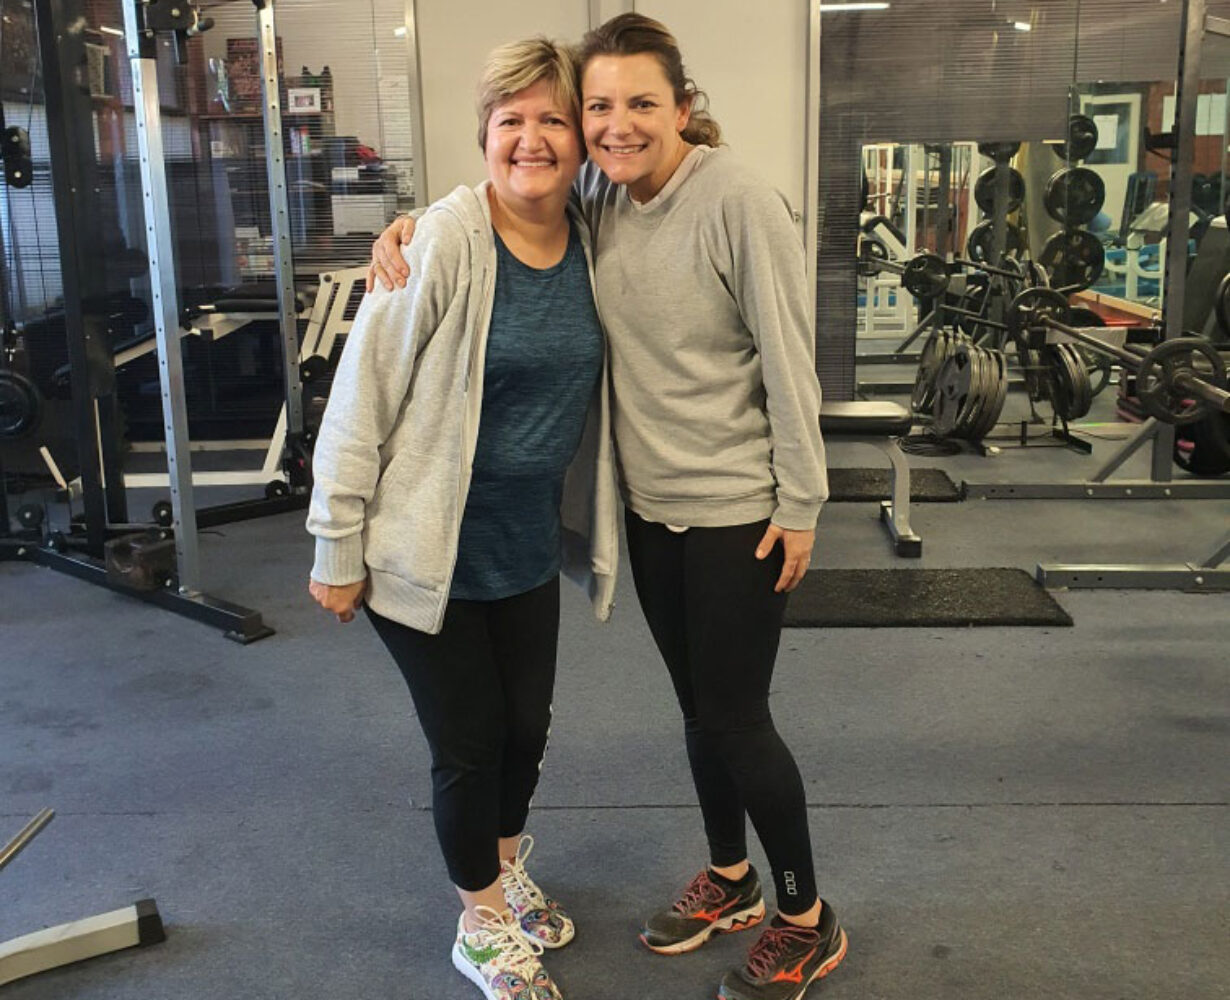 Maria Maffei with trainer Cass, before her Power to Move transformation.